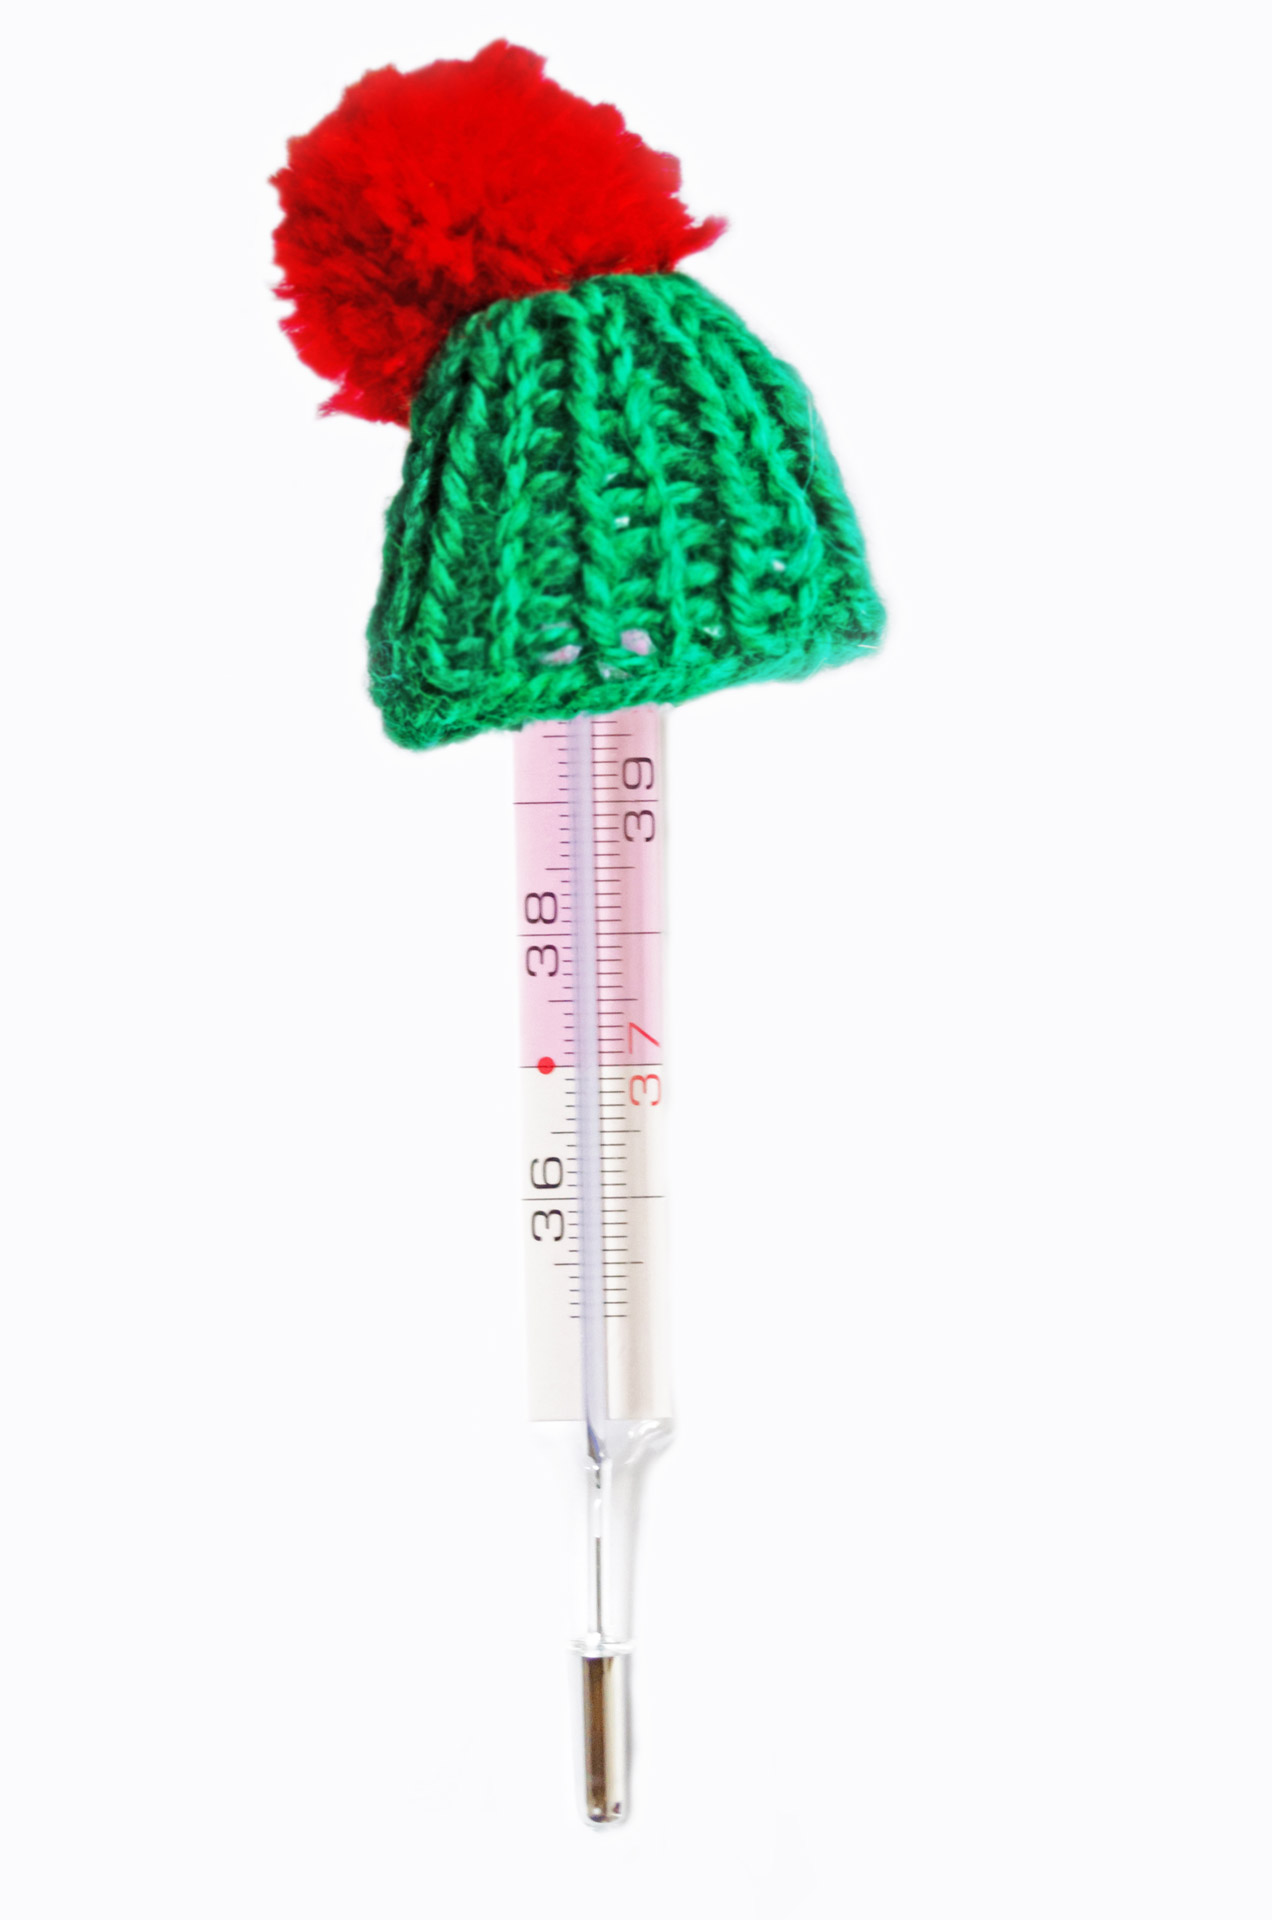 fever illness thermometer free photo